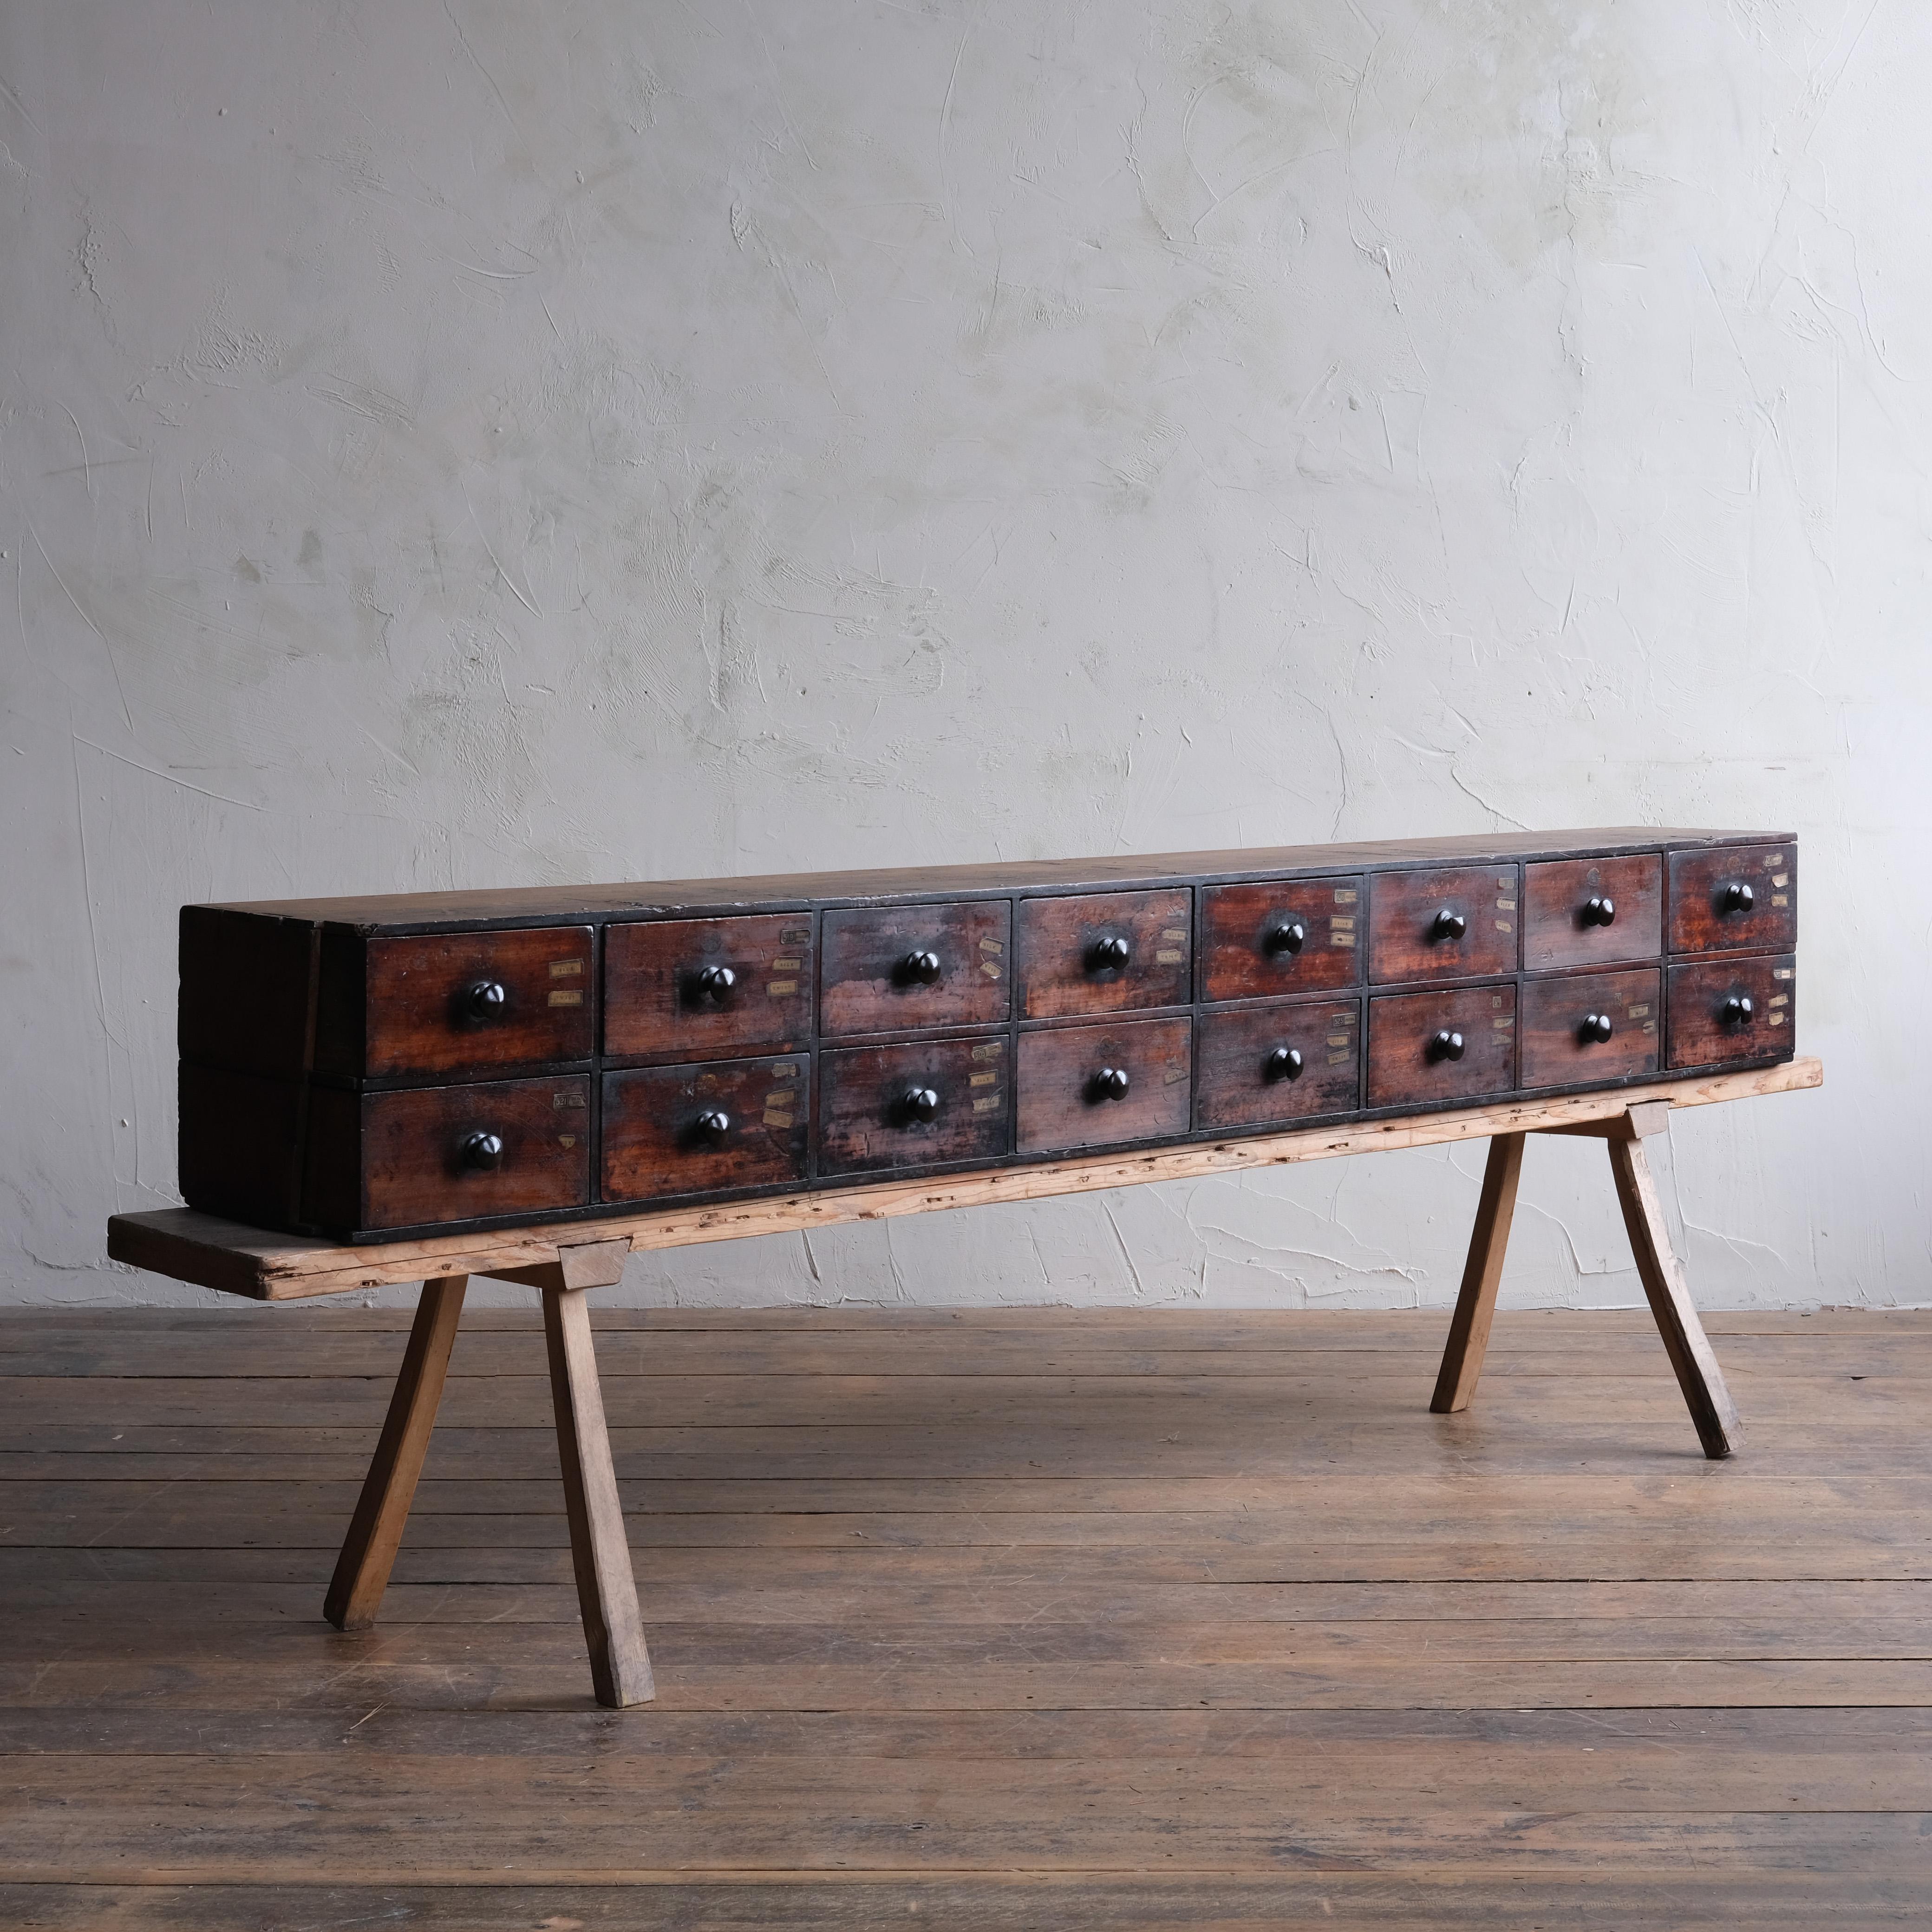 A very attractively worn mid 19th century bank of apothecary drawers. The mahogany drawers encased by a long dovetailed pine carcass and its original back. A well used piece that does show it age with various losses such as the sides and a few